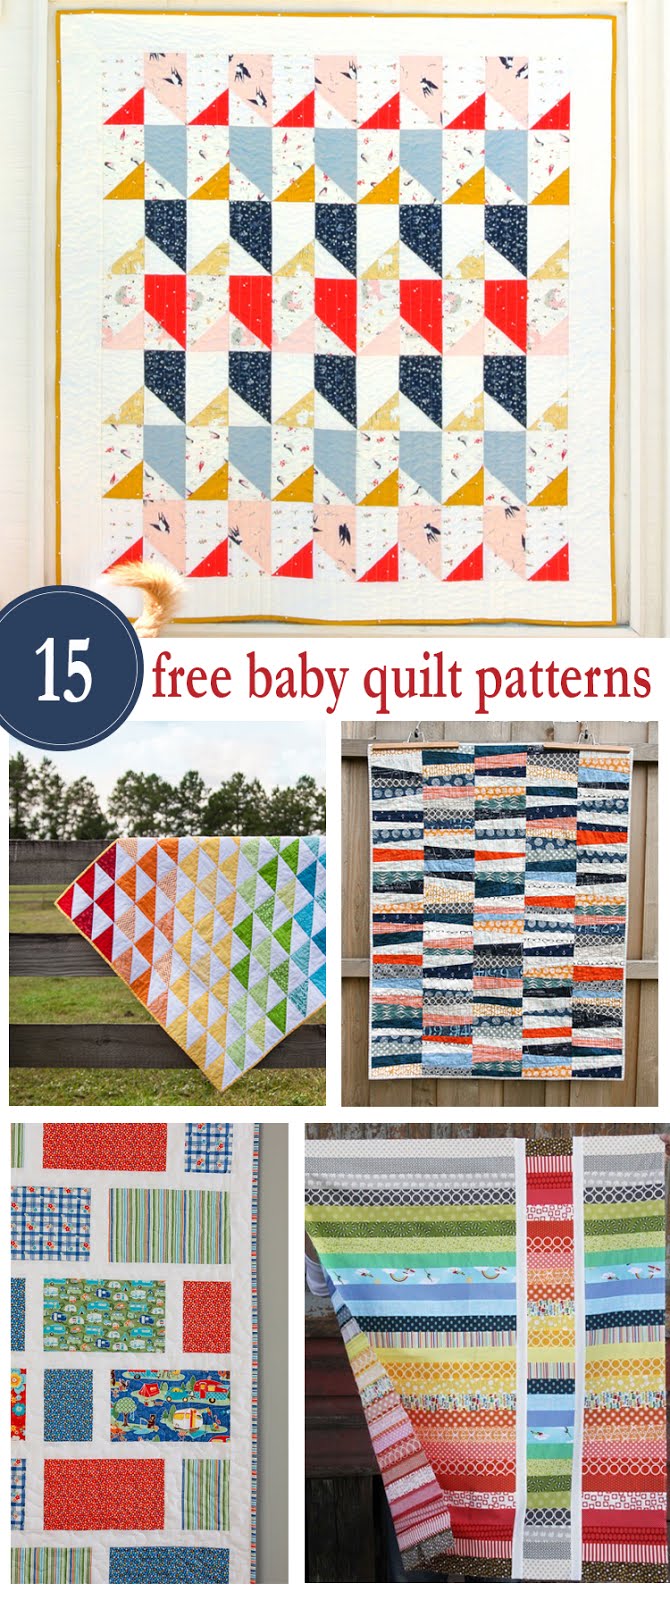 Woodberry Way: Easy Strip Quilt Pattern- Baby Basket